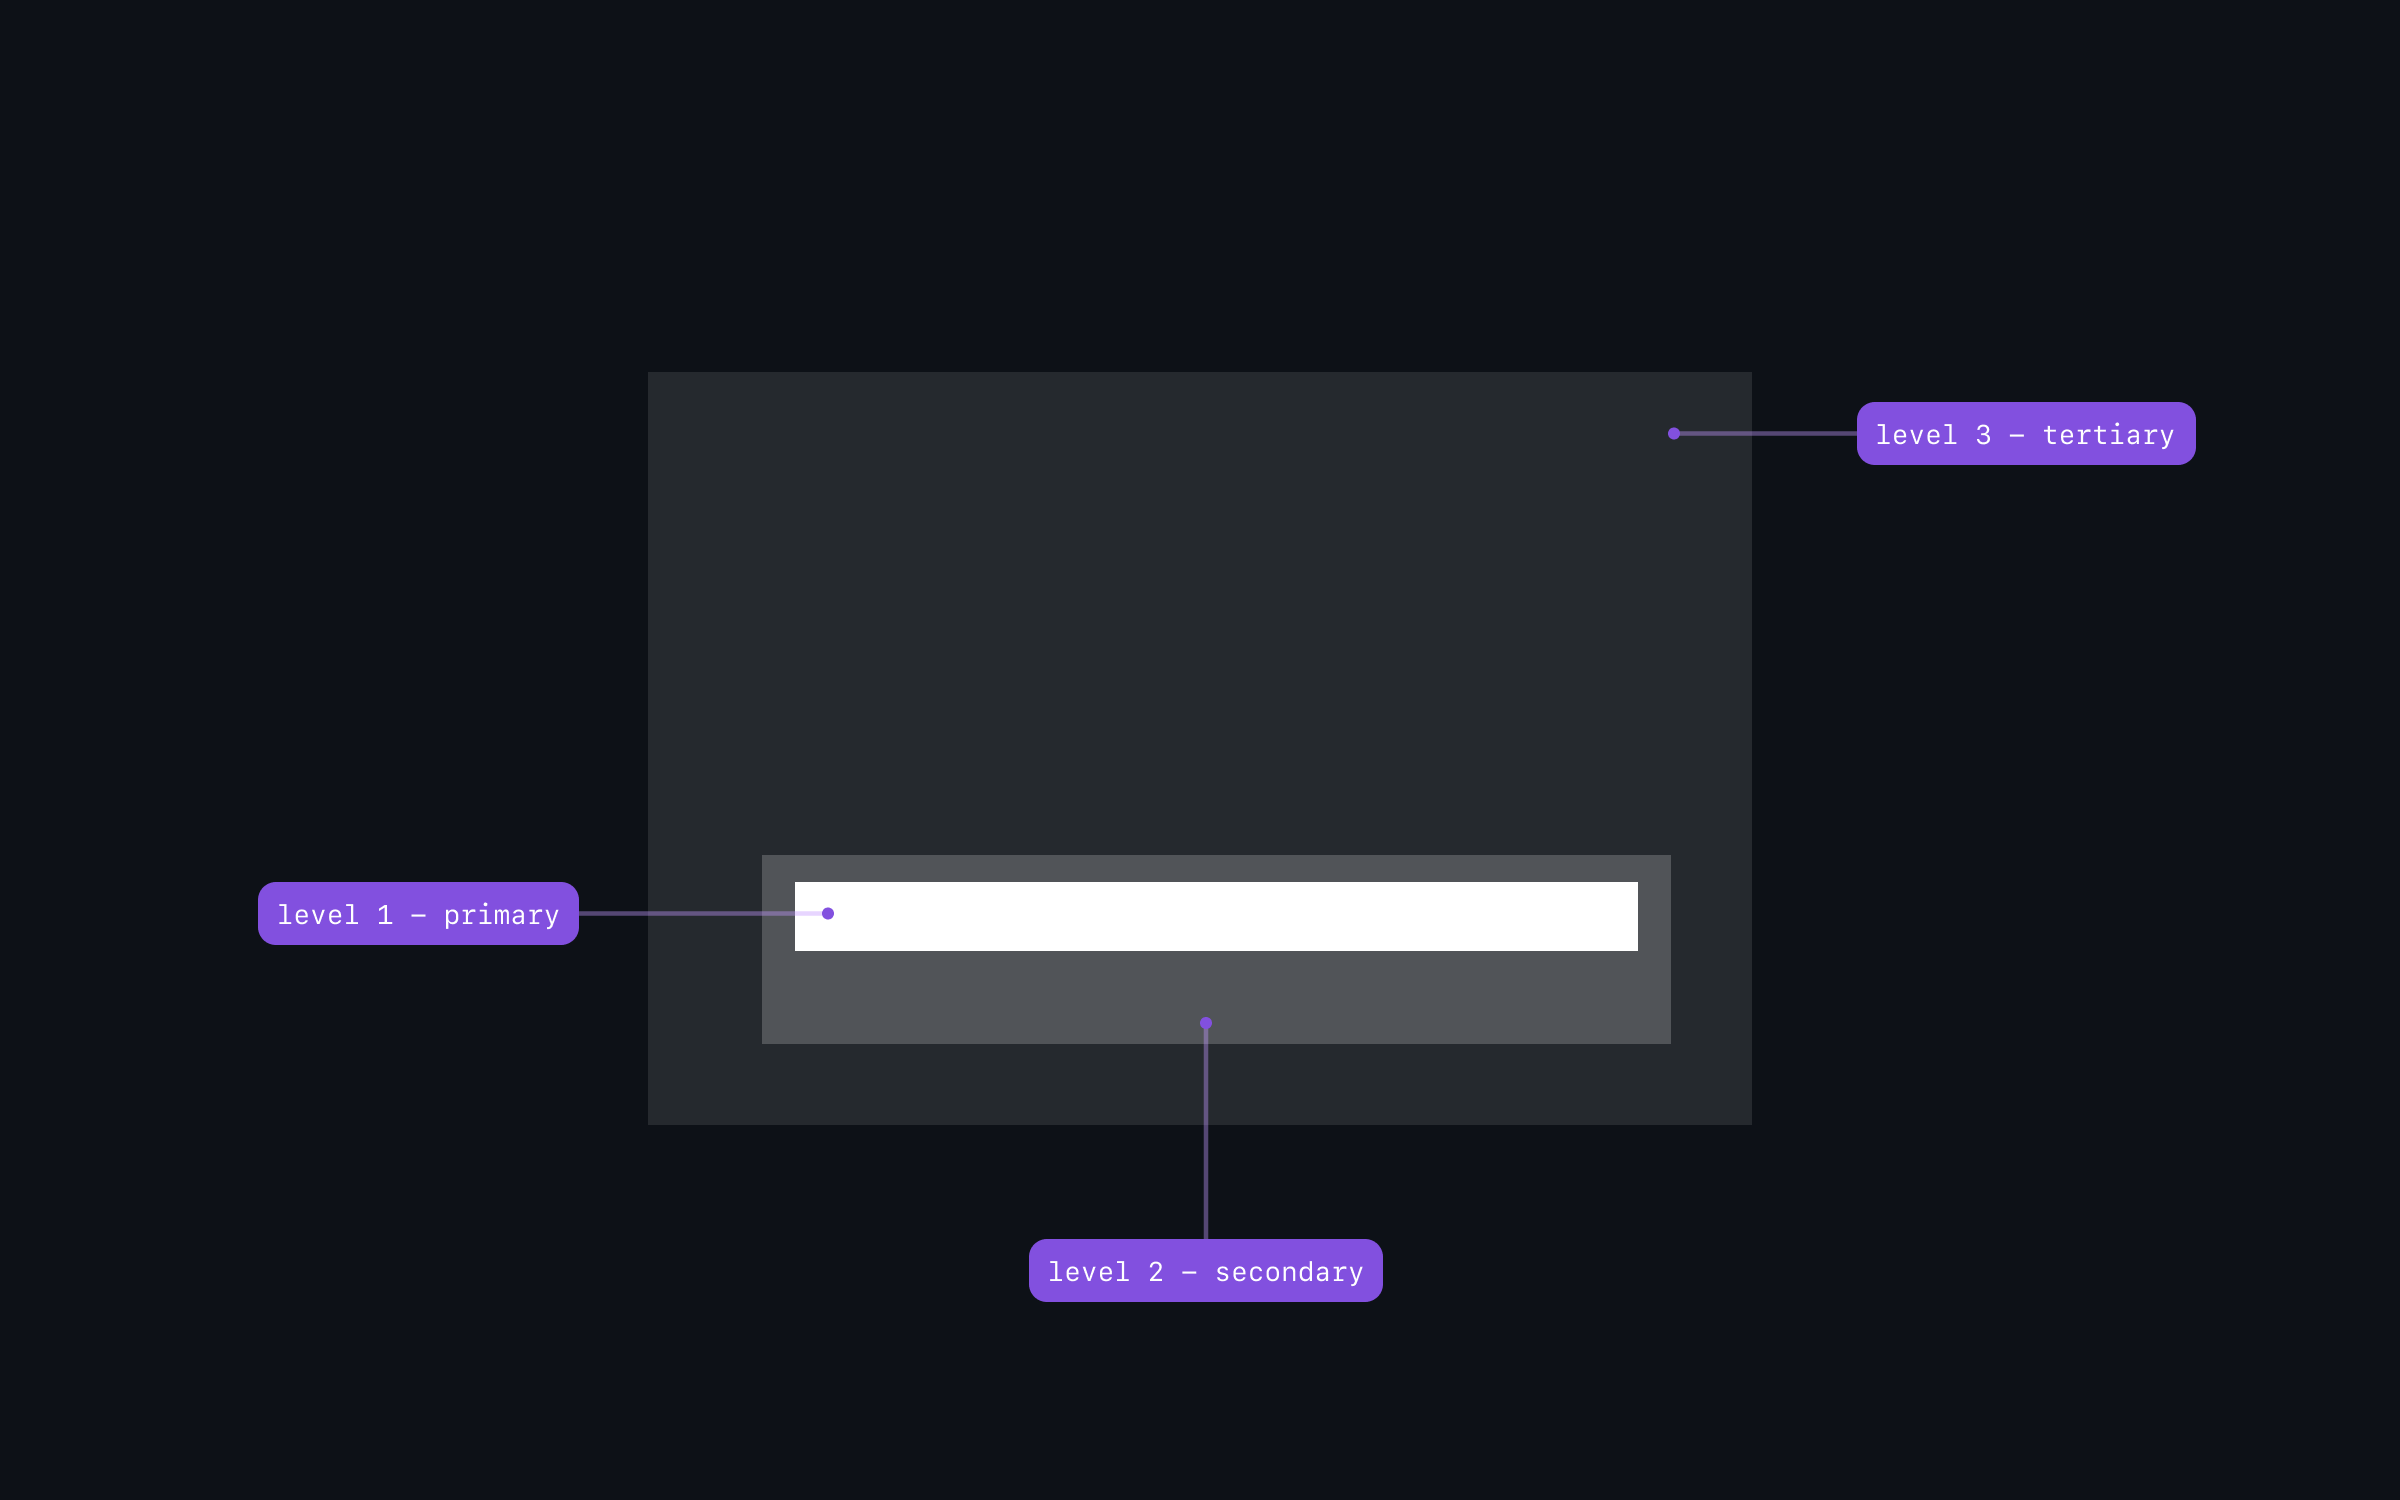 Example of a simplified CLI user interface split into 3 layers